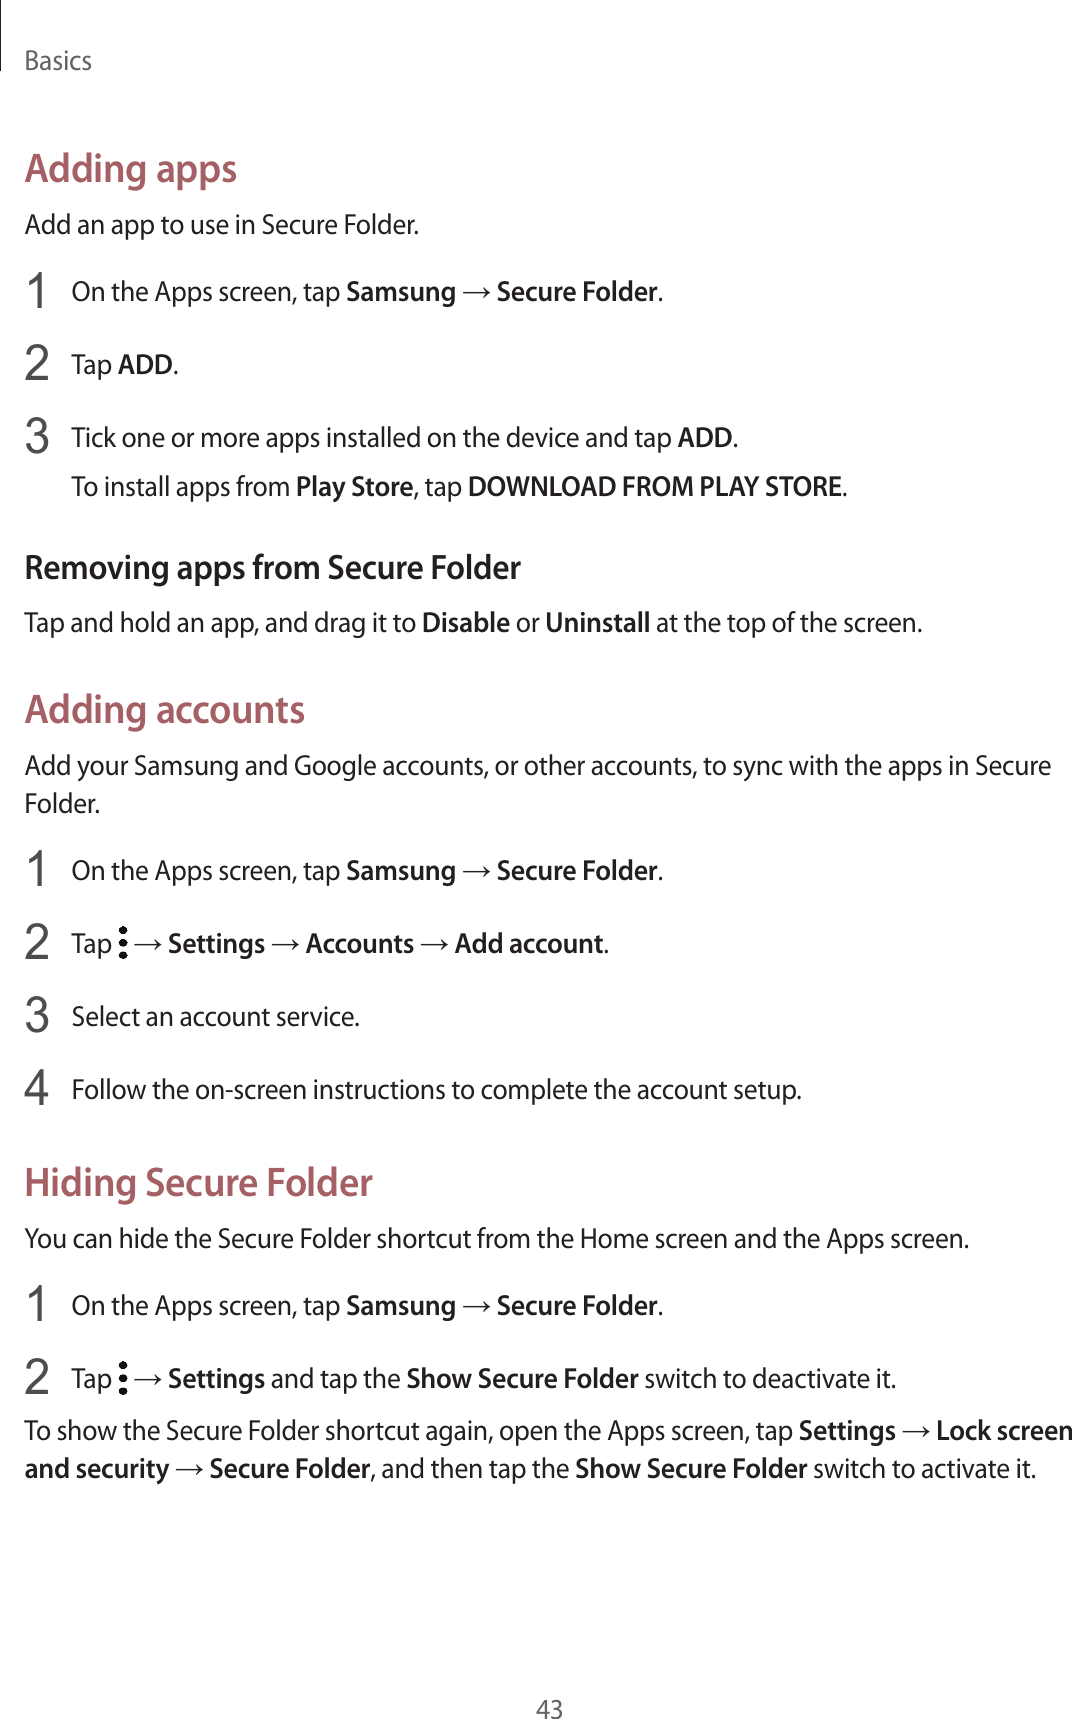 Basics43Adding appsAdd an app to use in Secure Folder.1  On the Apps screen, tap Samsung → Secure Folder.2  Tap ADD.3  Tick one or more apps installed on the device and tap ADD.To install apps from Play Store, tap DOWNLOAD FROM PLAY STORE.Removing apps from Secure FolderTap and hold an app, and drag it to Disable or Uninstall at the top of the screen.Adding accountsAdd your Samsung and Google accounts, or other accounts, to sync with the apps in Secure Folder.1  On the Apps screen, tap Samsung → Secure Folder.2  Tap   → Settings → Accounts → Add account.3  Select an account service.4  Follow the on-screen instructions to complete the account setup.Hiding Secure FolderYou can hide the Secure Folder shortcut from the Home screen and the Apps screen.1  On the Apps screen, tap Samsung → Secure Folder.2  Tap   → Settings and tap the Show Secure Folder switch to deactivate it.To show the Secure Folder shortcut again, open the Apps screen, tap Settings → Lock screen and security → Secure Folder, and then tap the Show Secure Folder switch to activate it.